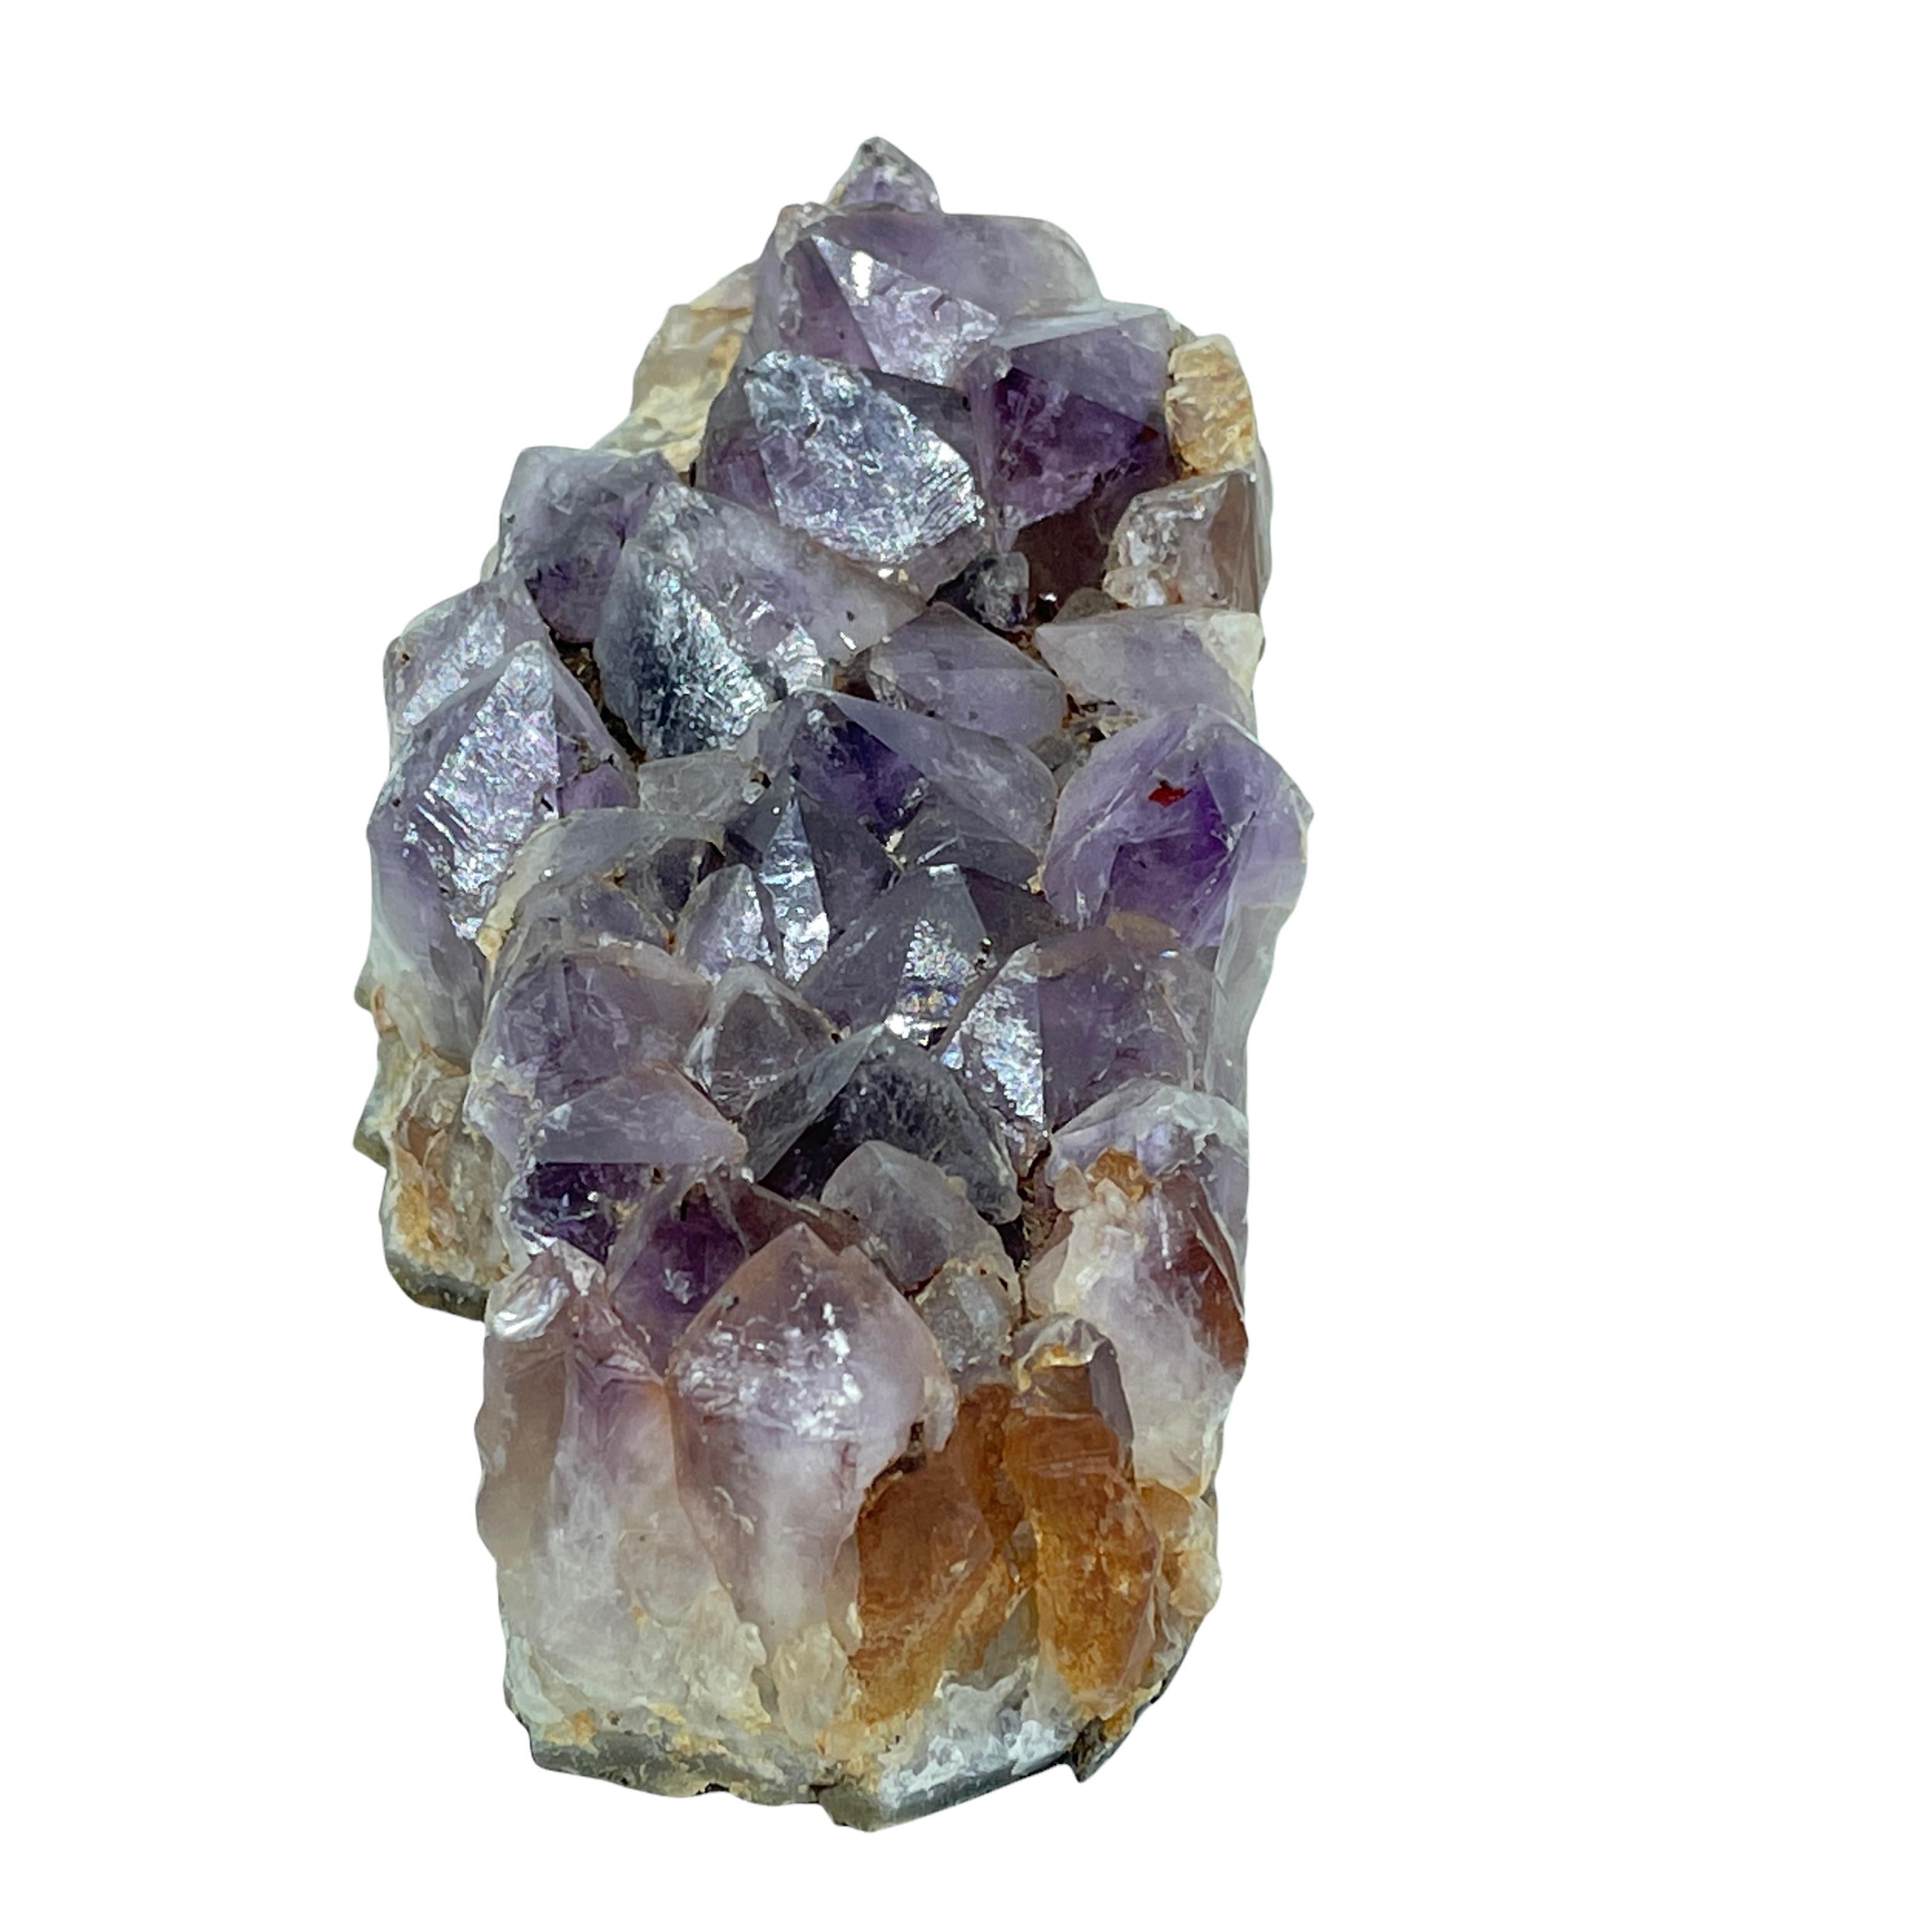 This stunning and sculptural amethyst geode were found in Brazil, where many of the world's most precious and exquisite gems are mined. It feature unfinished back showcasing the exterior of the geode in grisaille tones, and the interior geode form